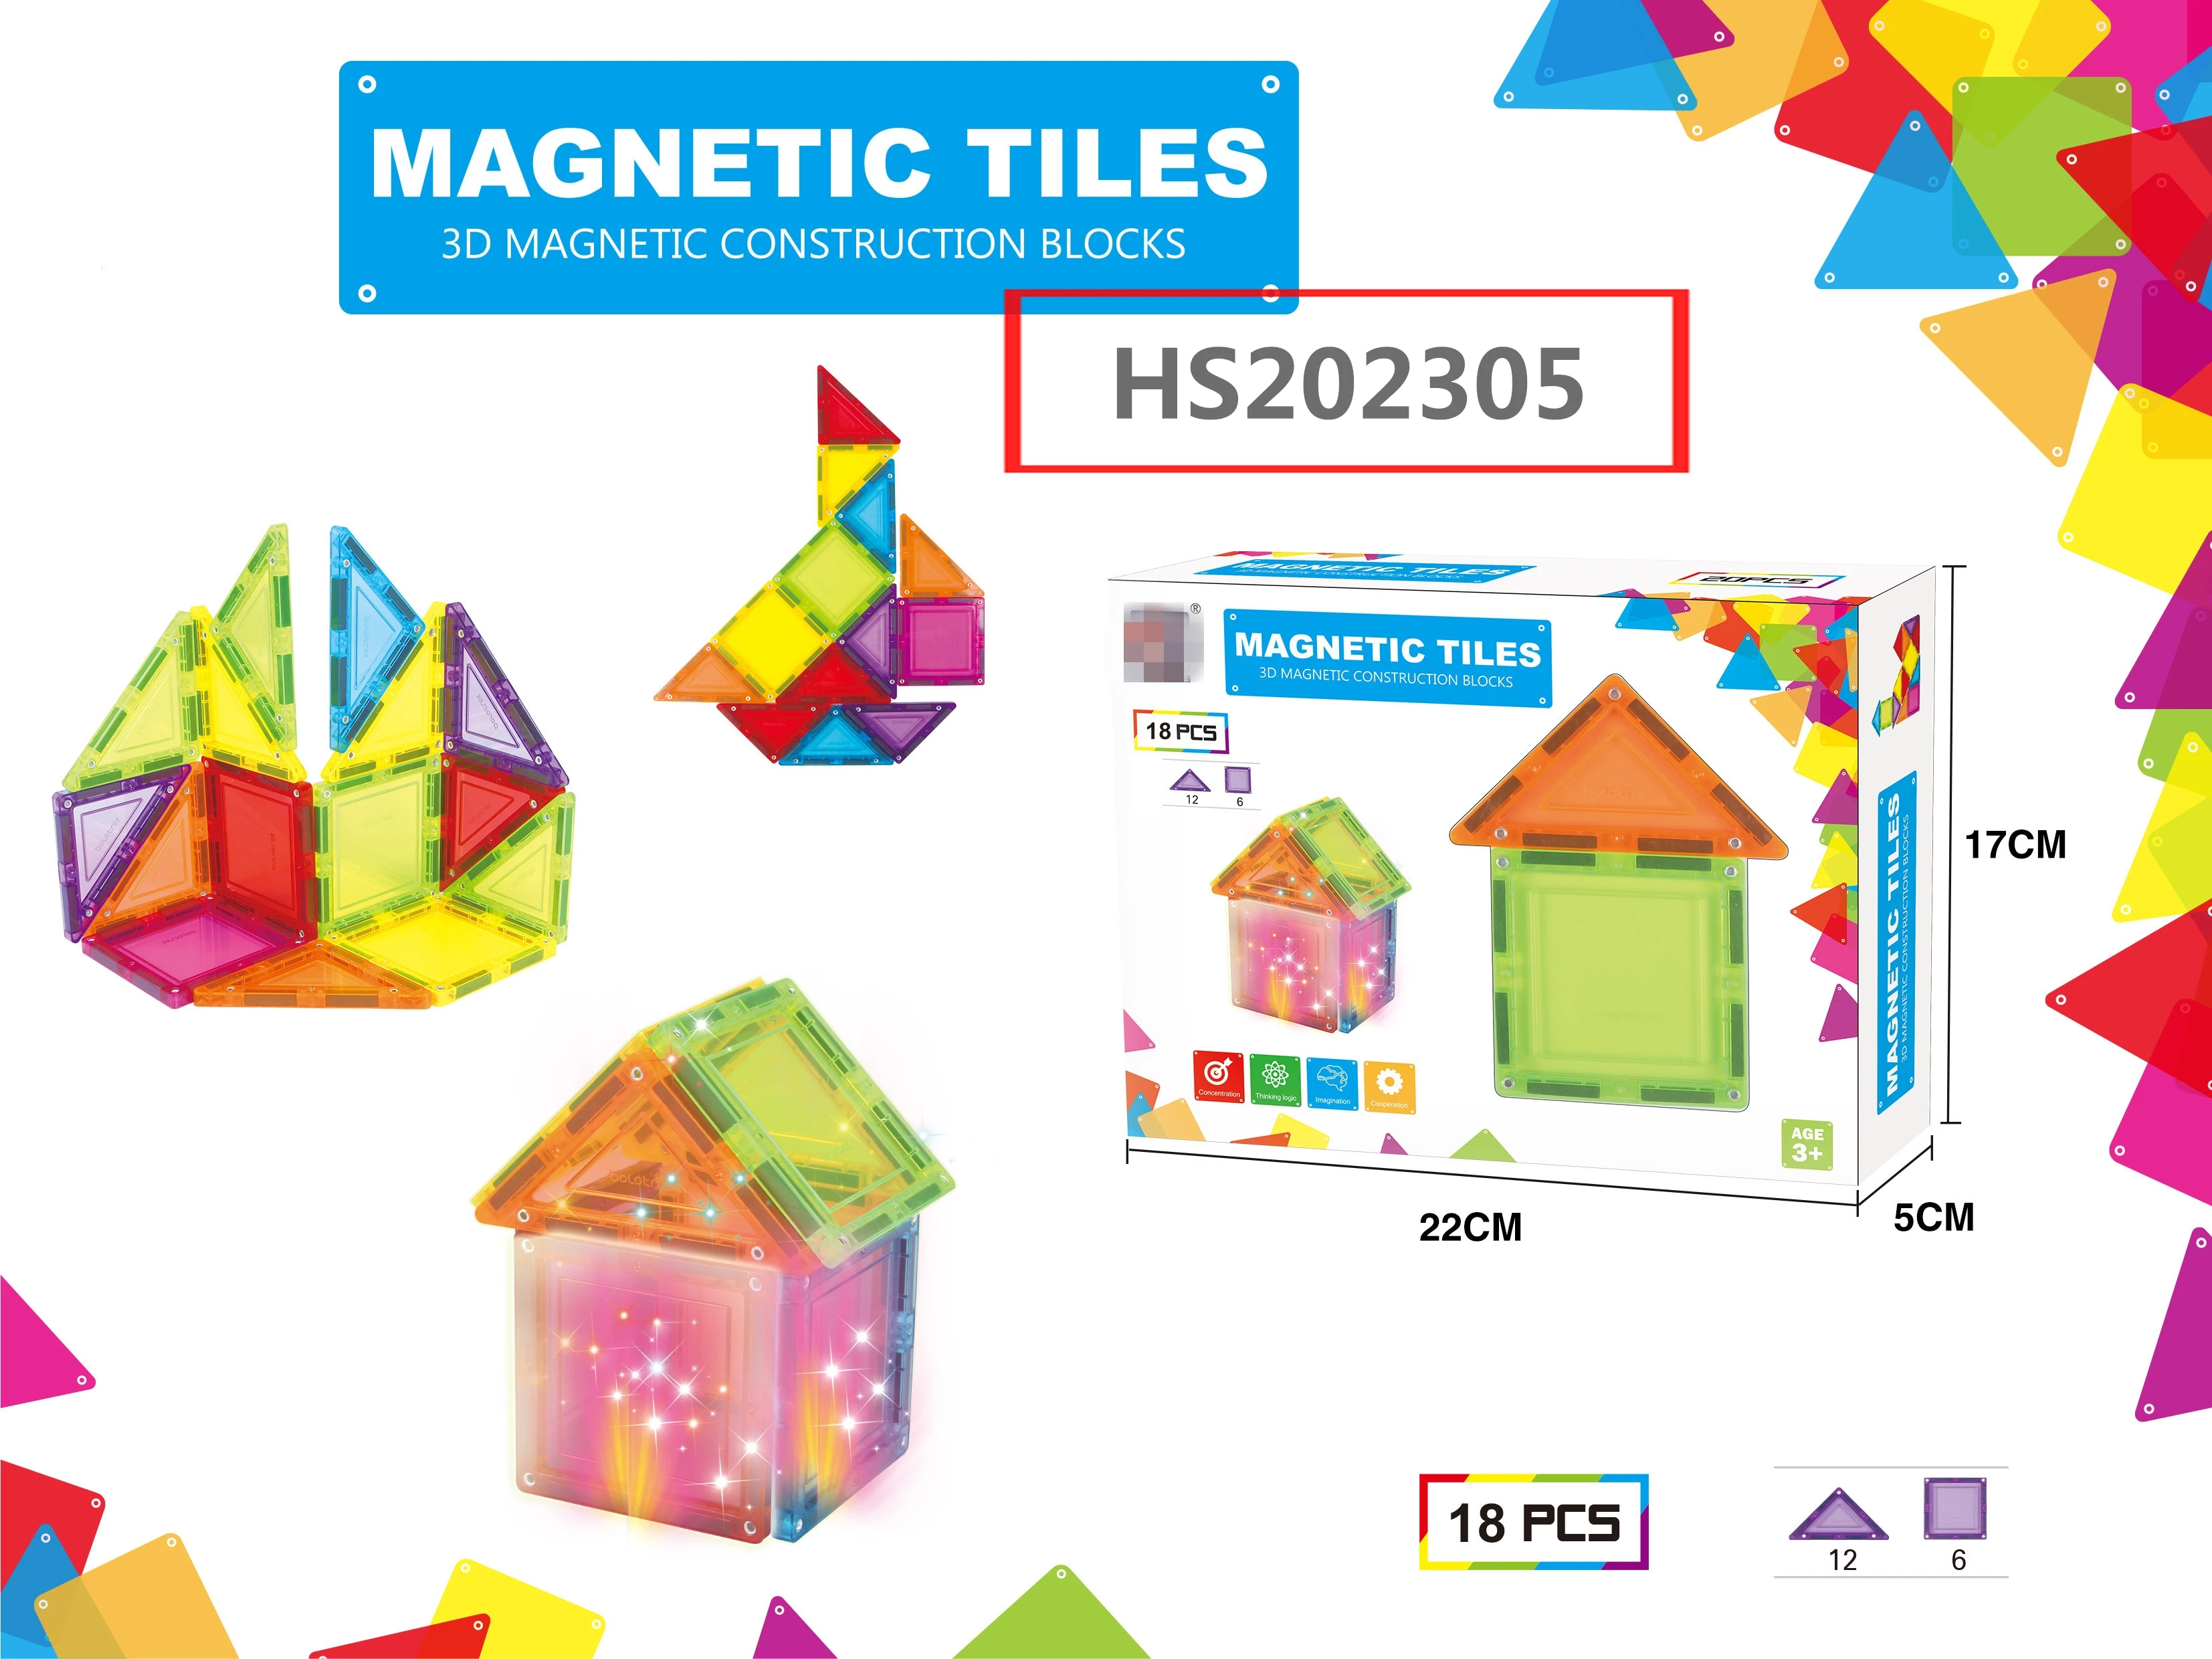 HS202305, Huwsin Toys, magic cube,Magnetic magnetic building block, Educational toy